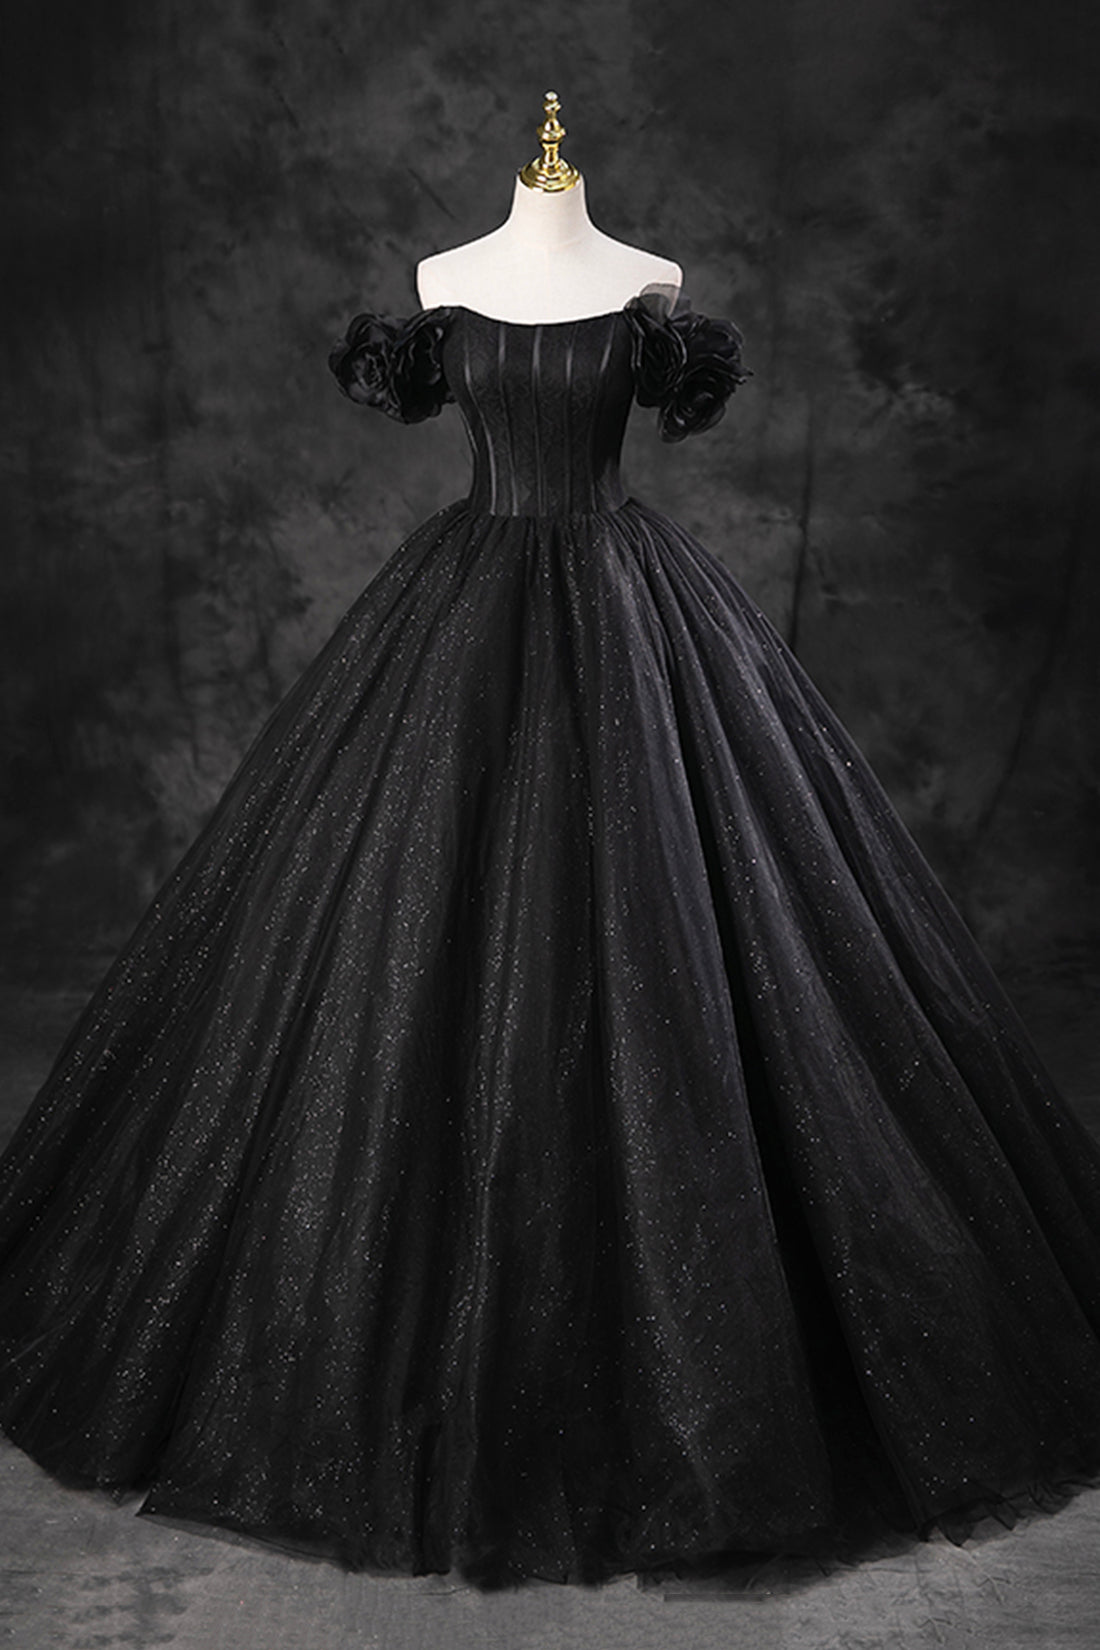 Prom Dress Places Near Me, Black Tulle Floor Length A-Line Prom Dress, Off the Shoulder Evening Party Dress